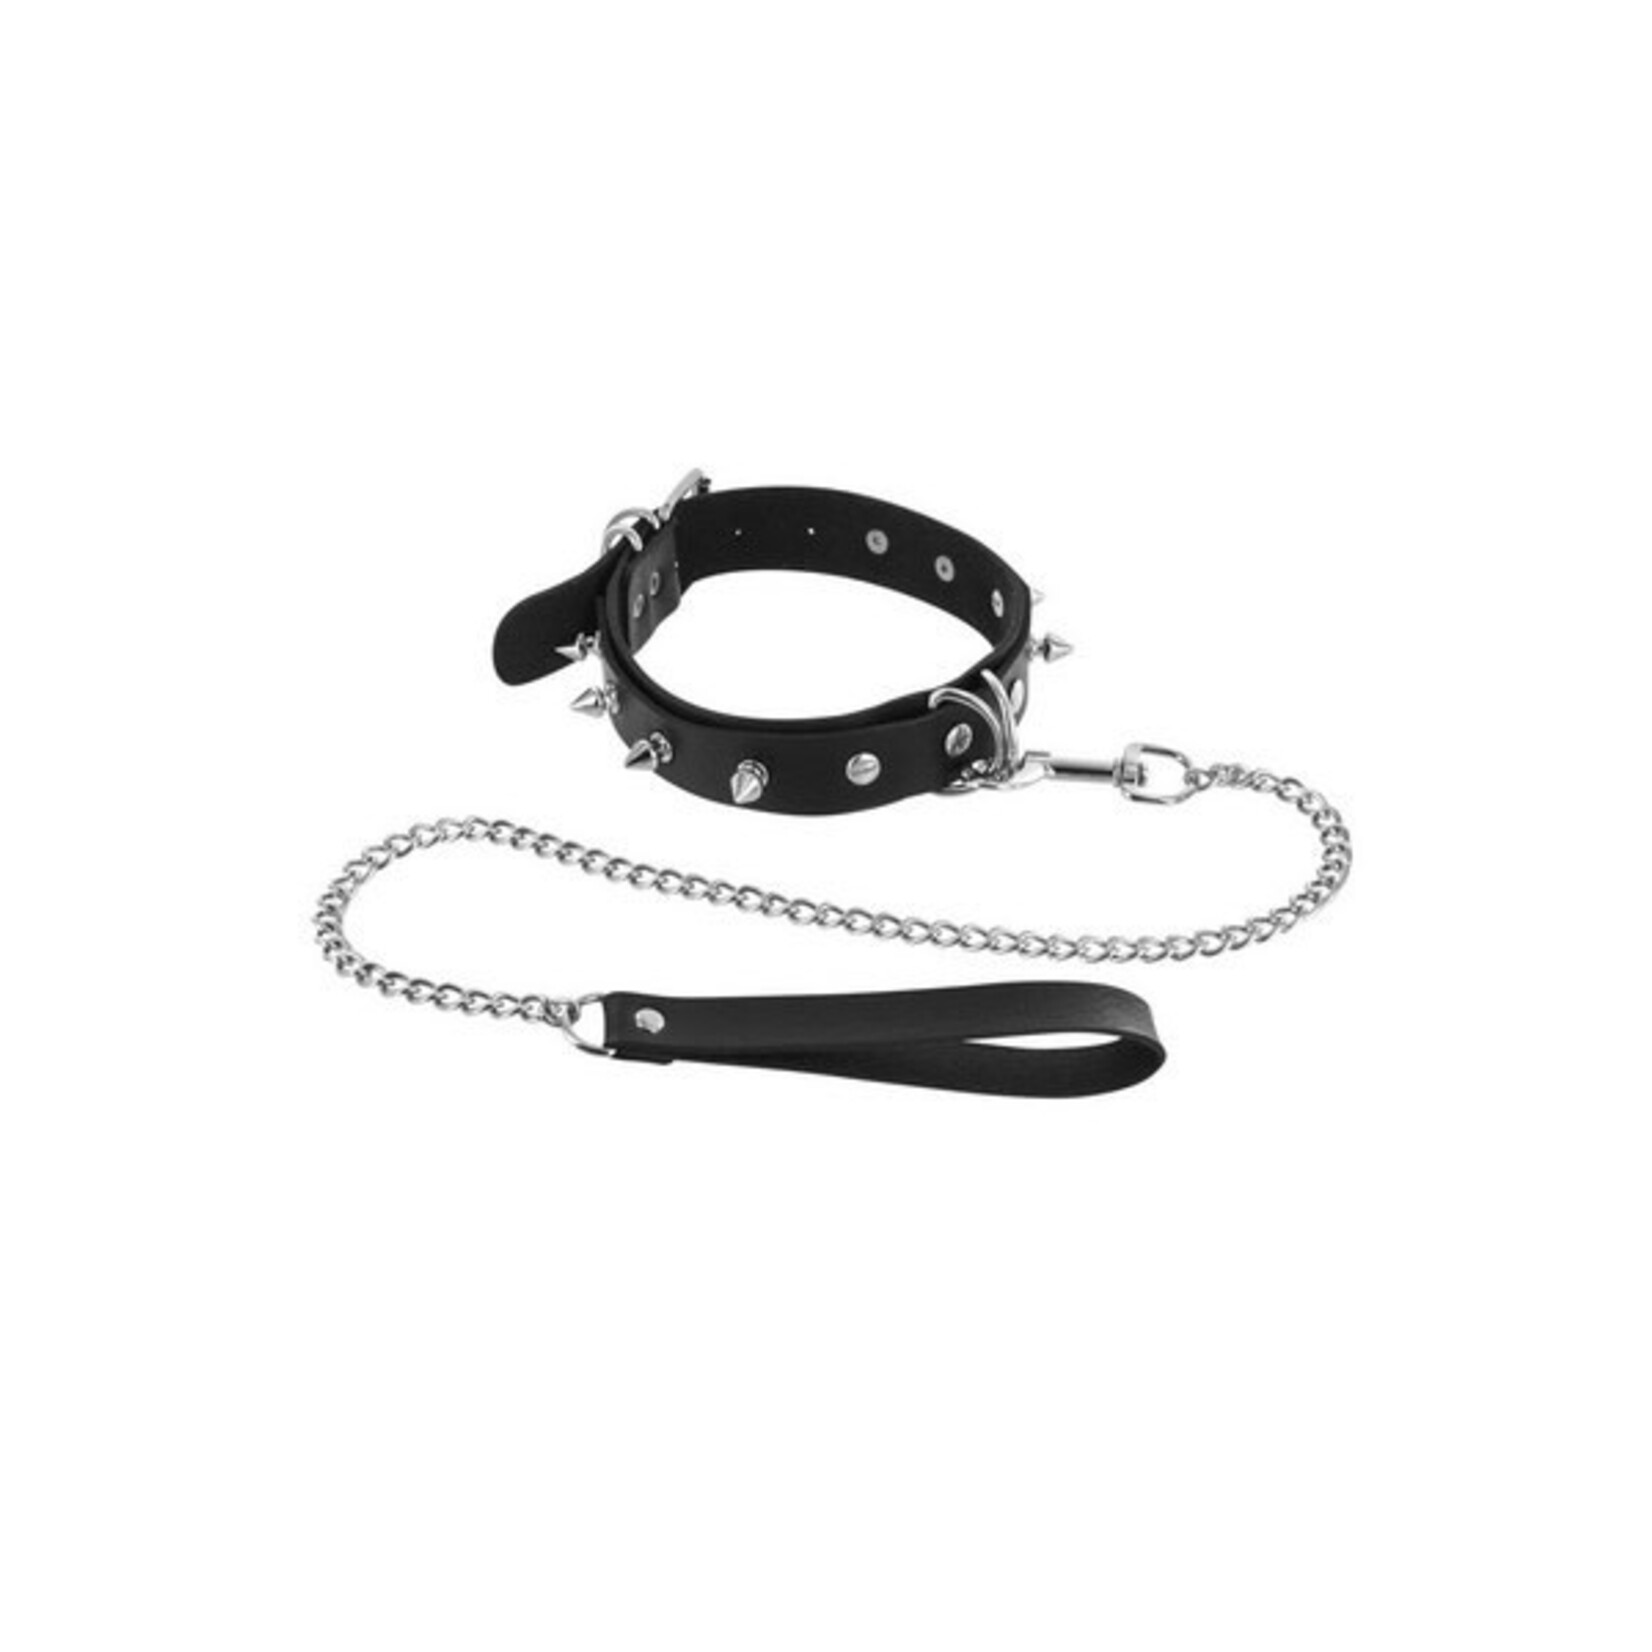 FETISHTENTATION FETISH TENTATION - CHOKER WITH METAL SPIKES AND RINGS